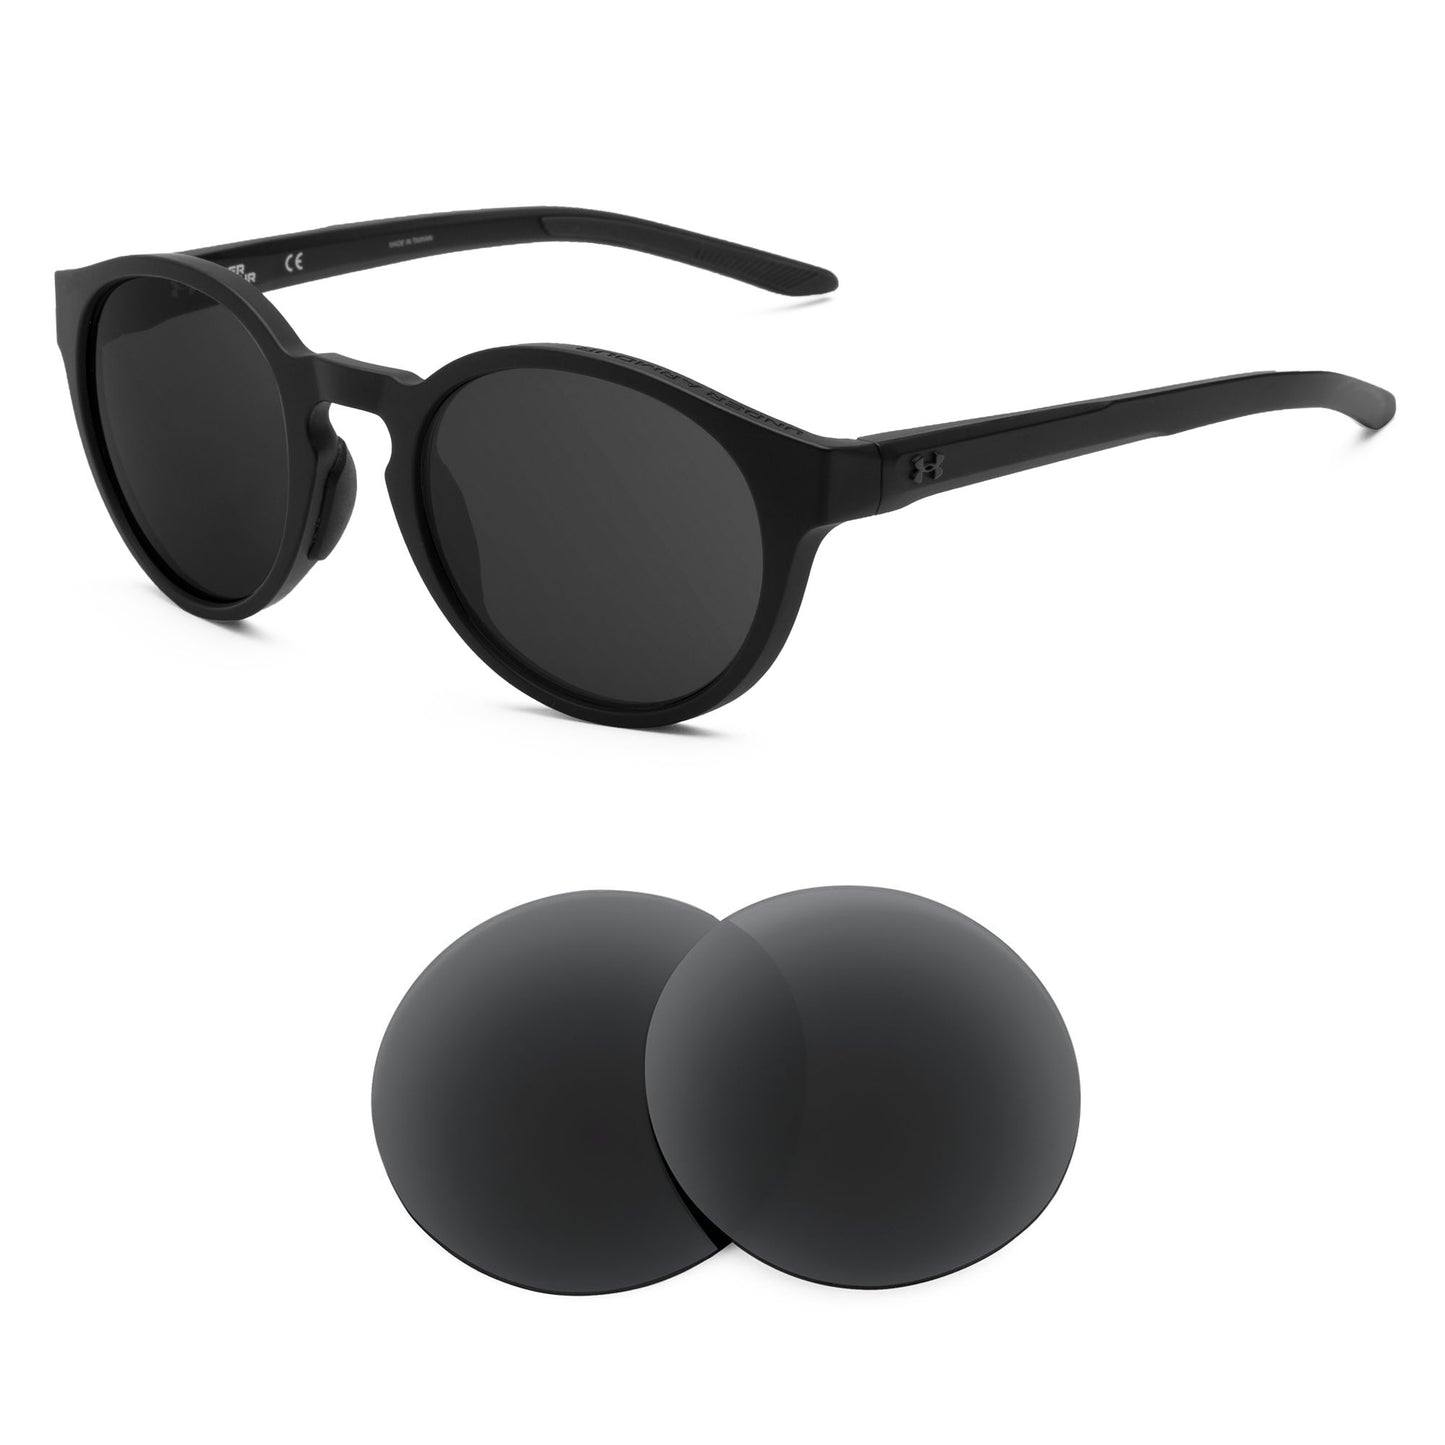 Under Armour Infinity sunglasses with replacement lenses